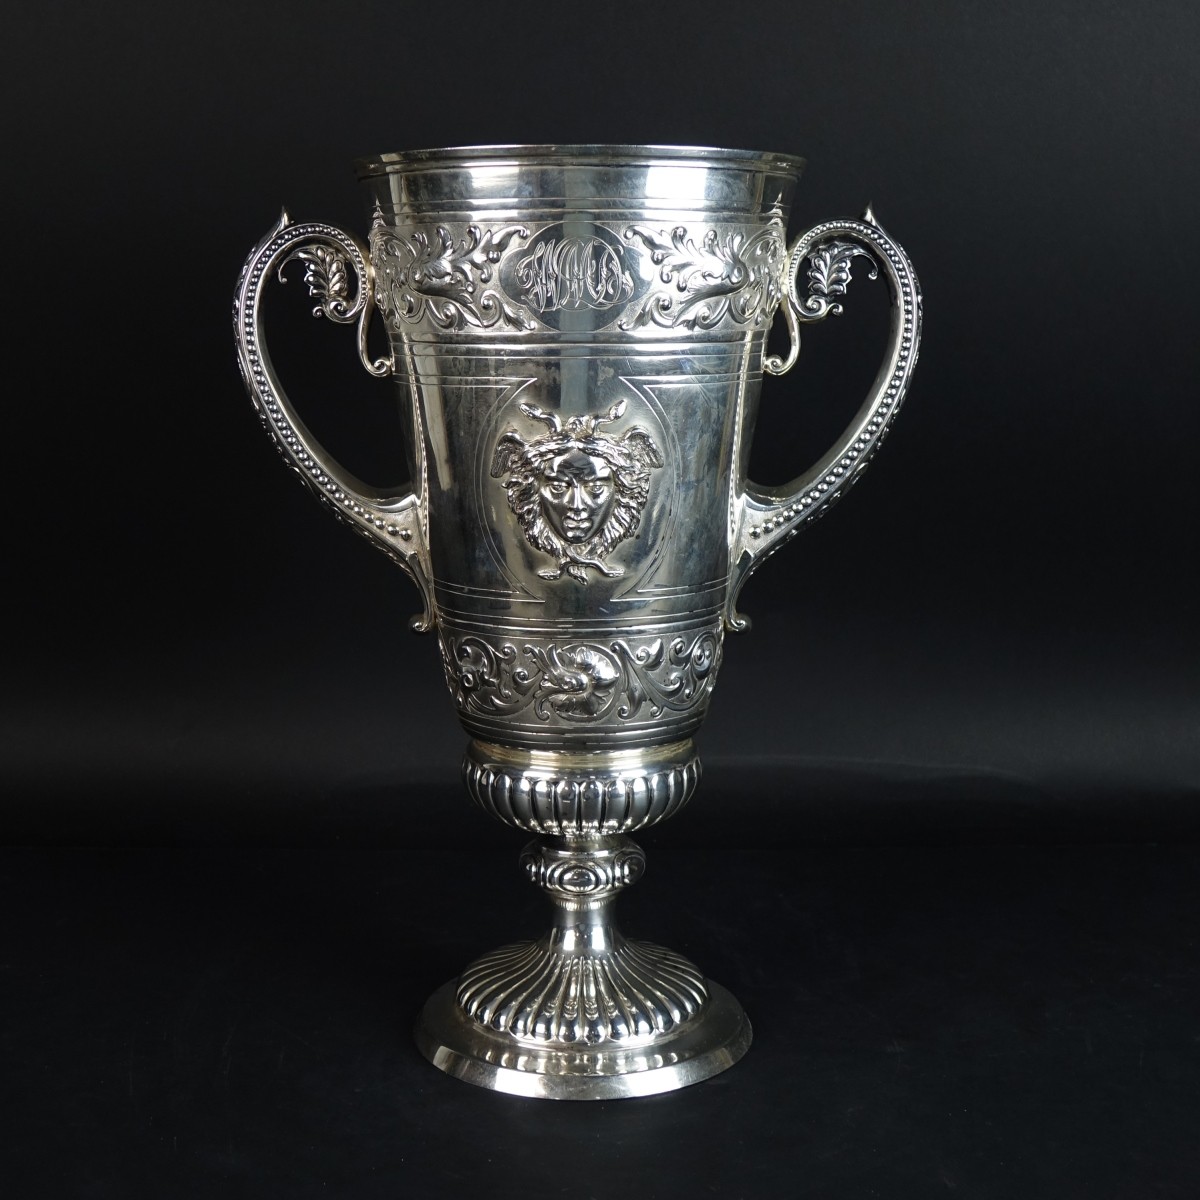 Robert Hennell lll, London Silver Cup